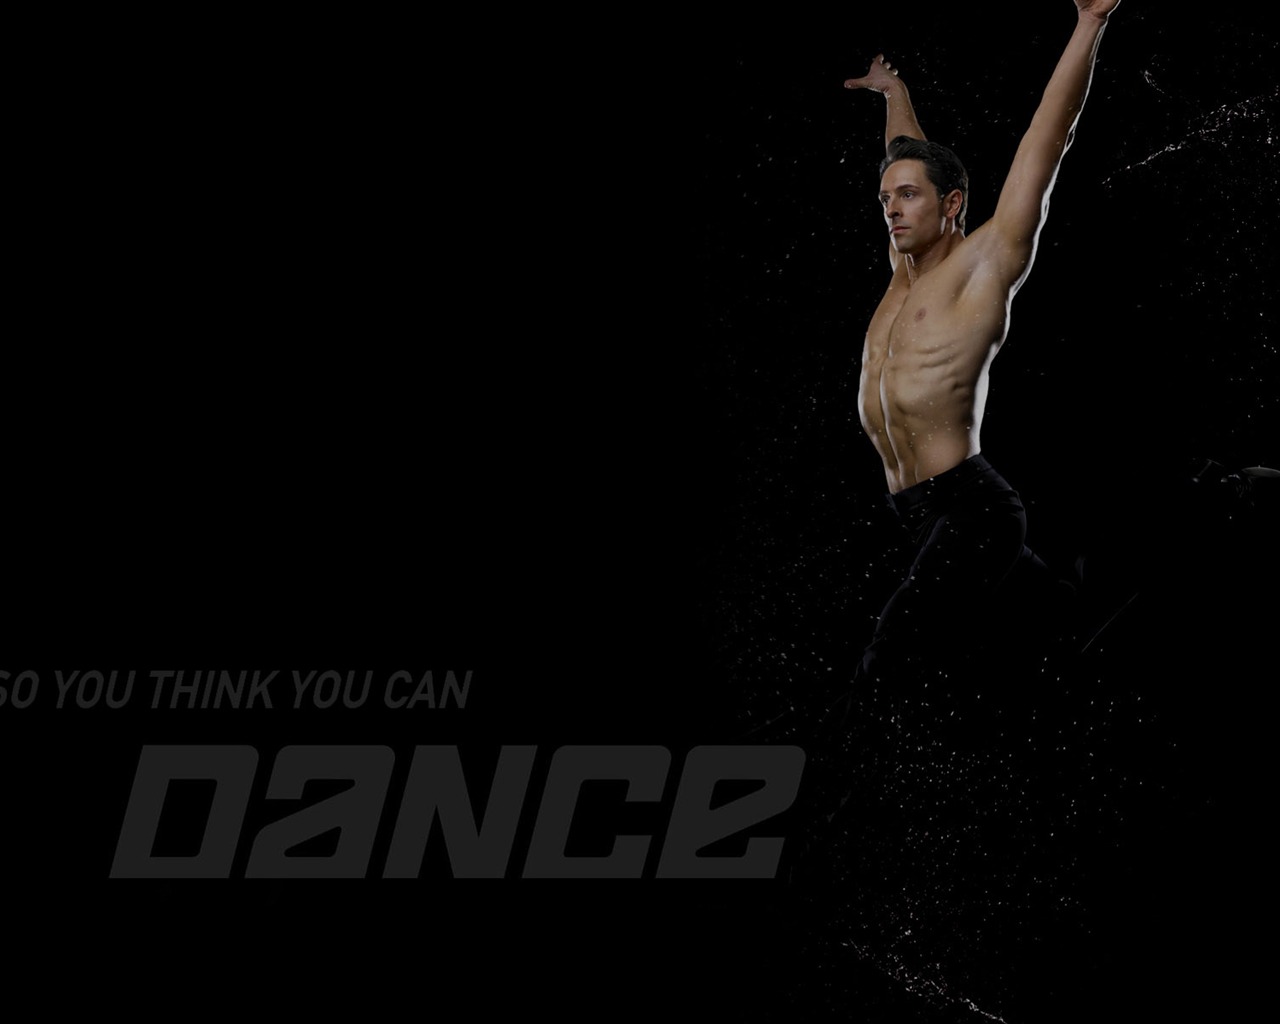 So You Think You Can Dance 舞林争霸 壁纸(二)10 - 1280x1024